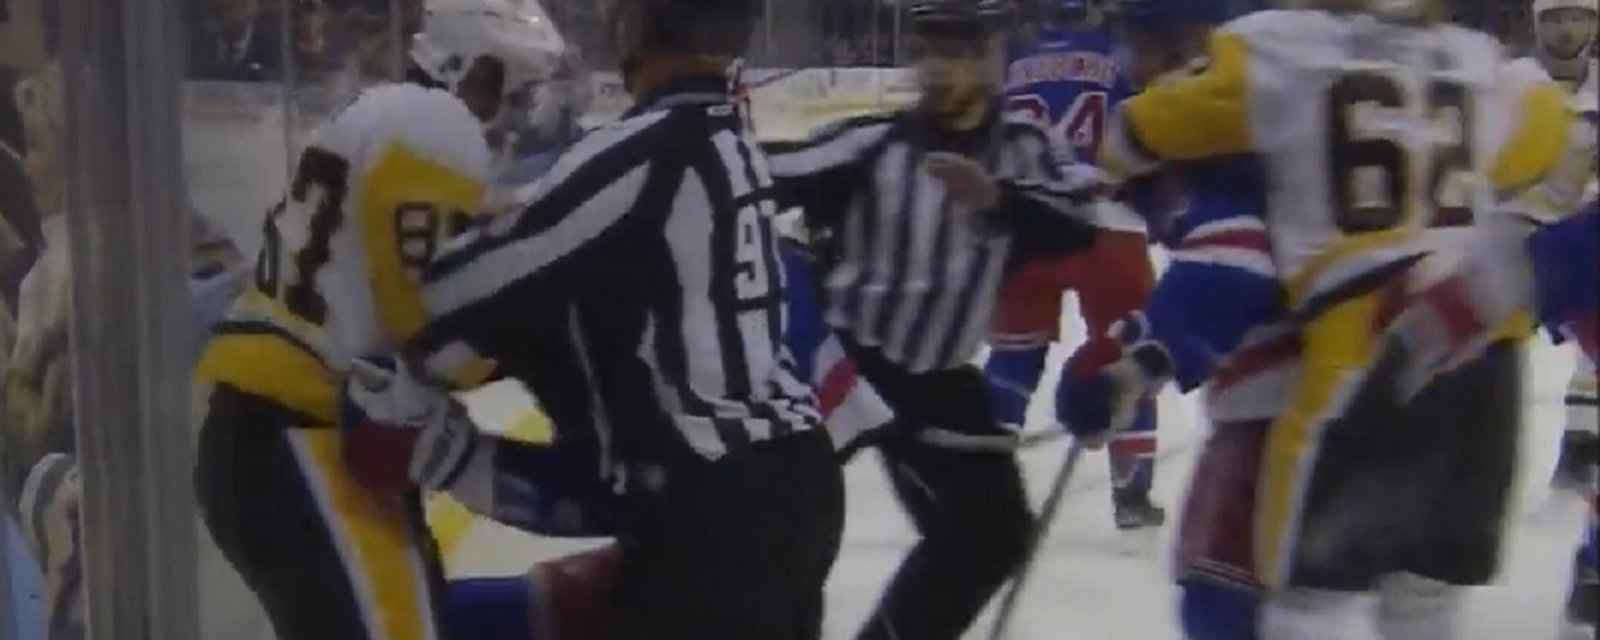 Crosby drops his gloves and jumps McDonagh for an ugly hit on his teammate.